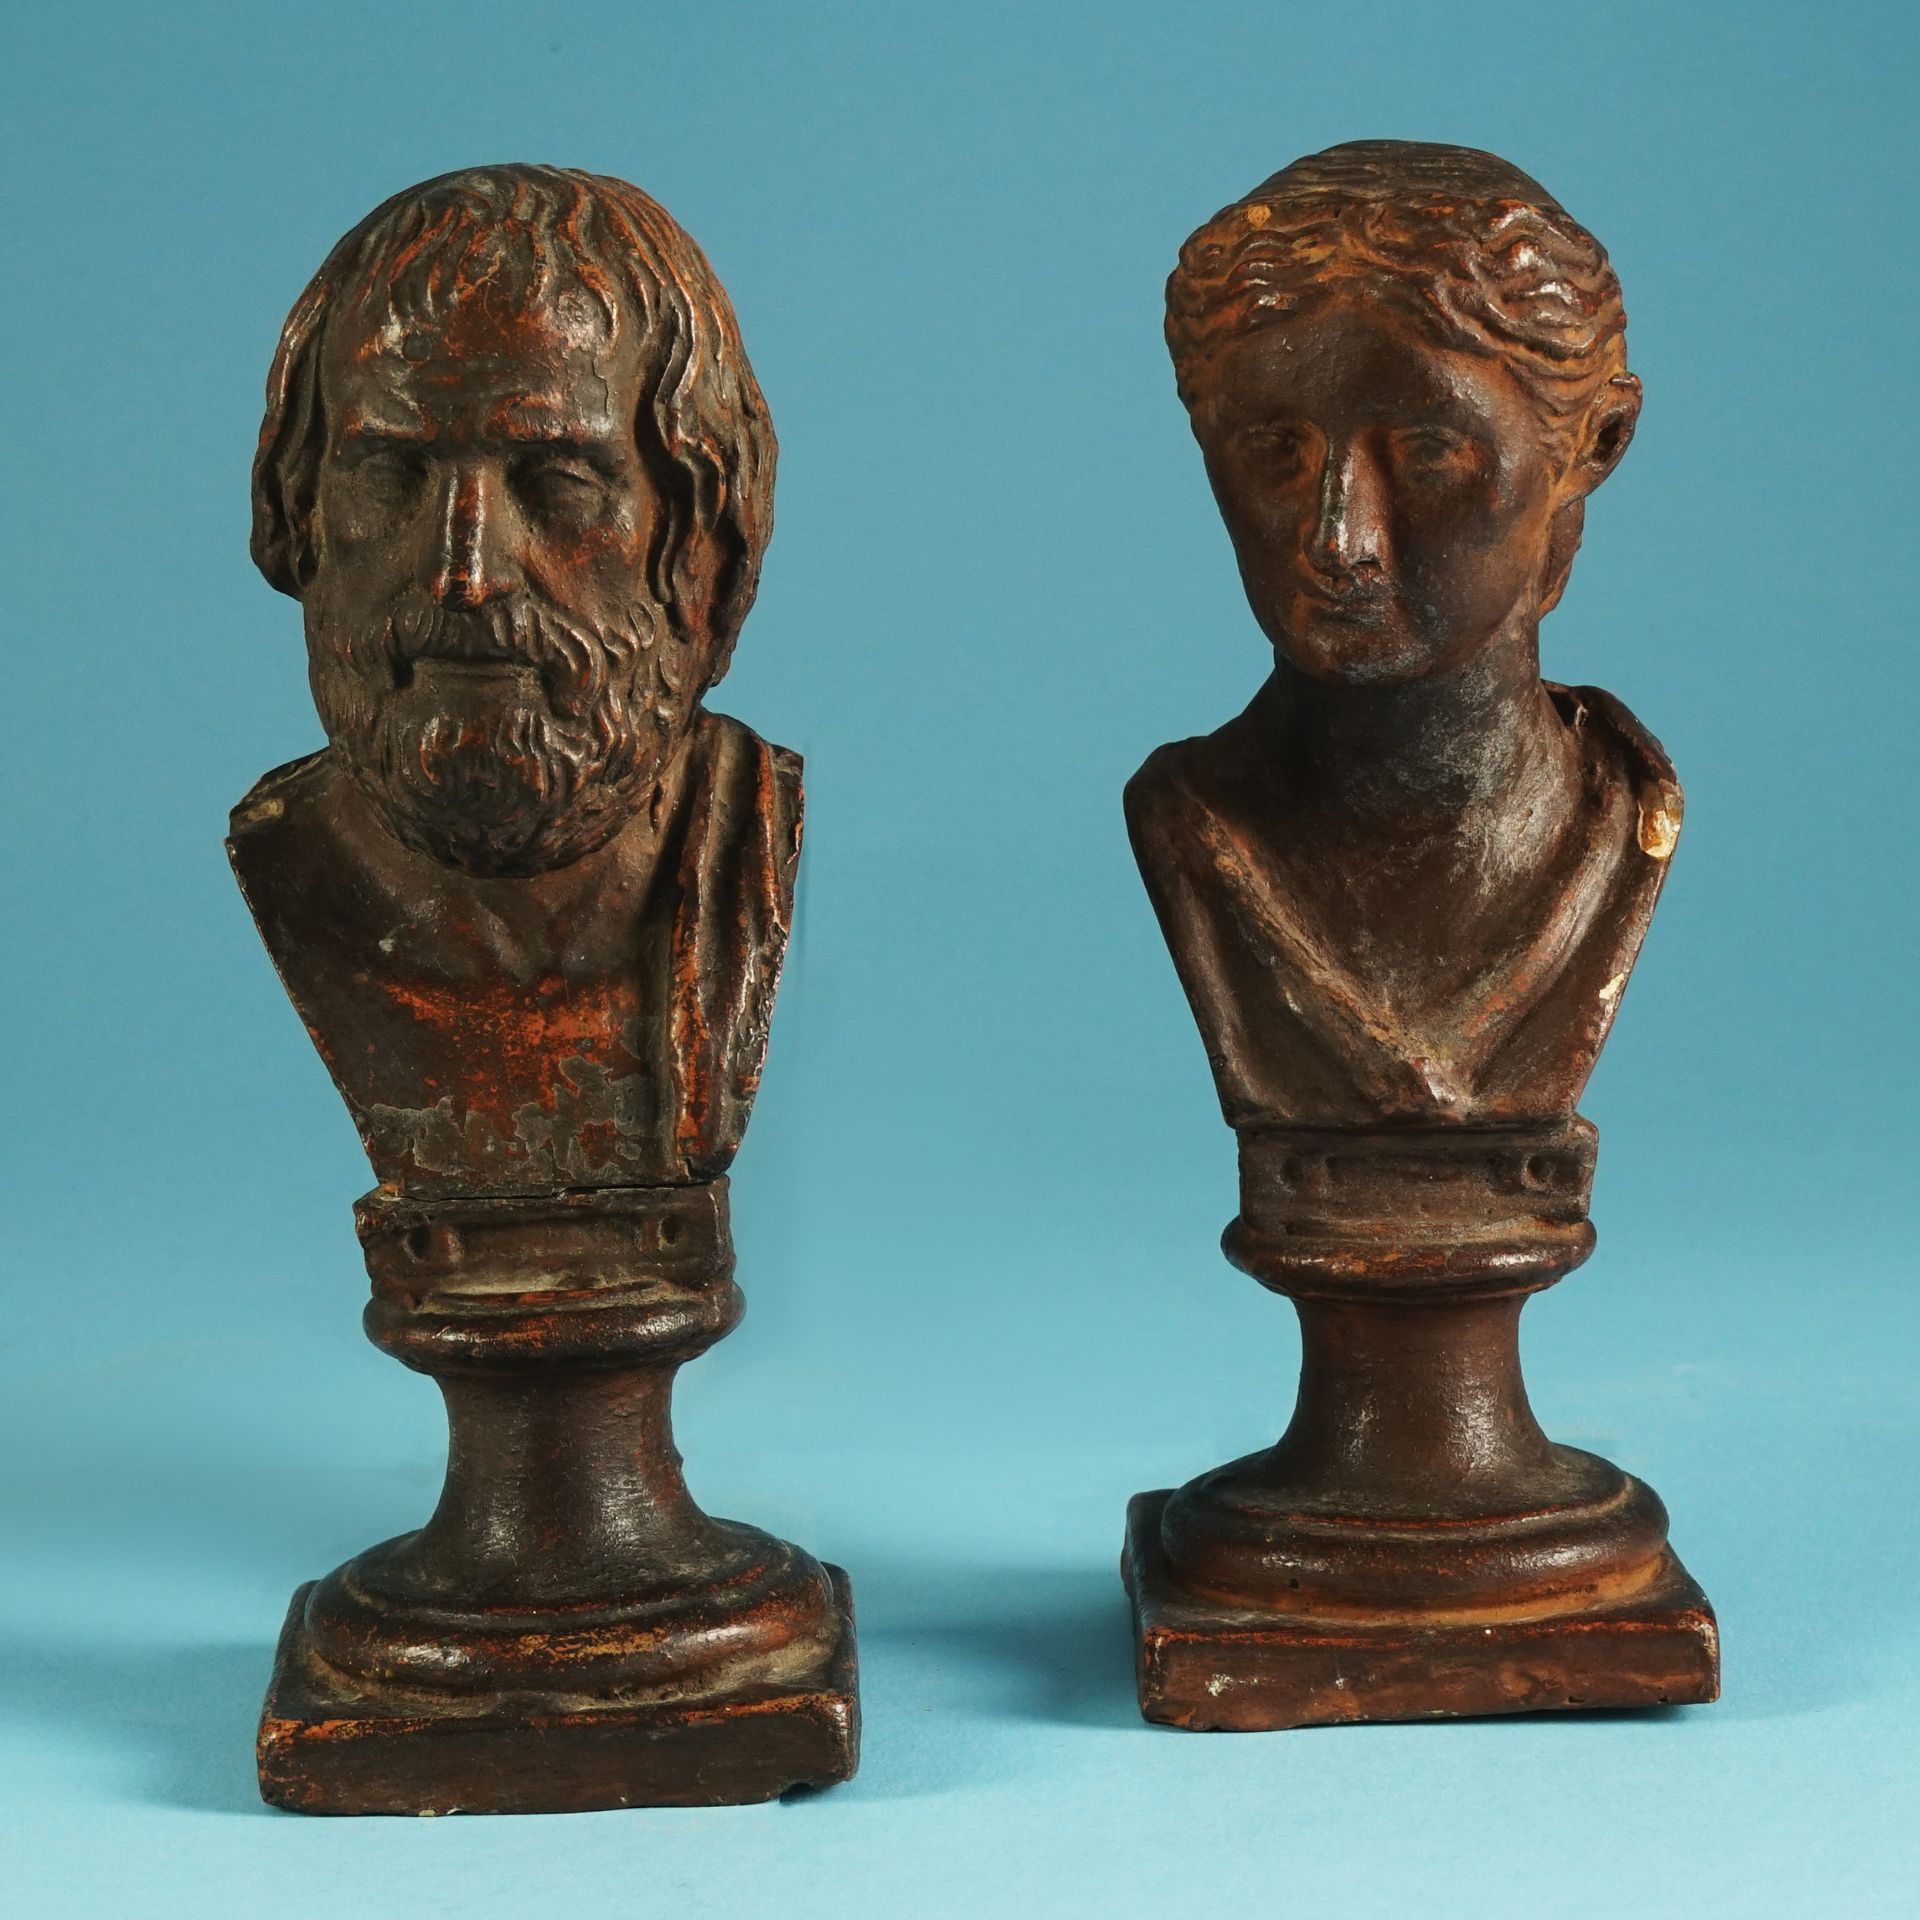 A pair of Neapolitan patinated terracotta small busts, 19th century 20cm. high each (small chips)